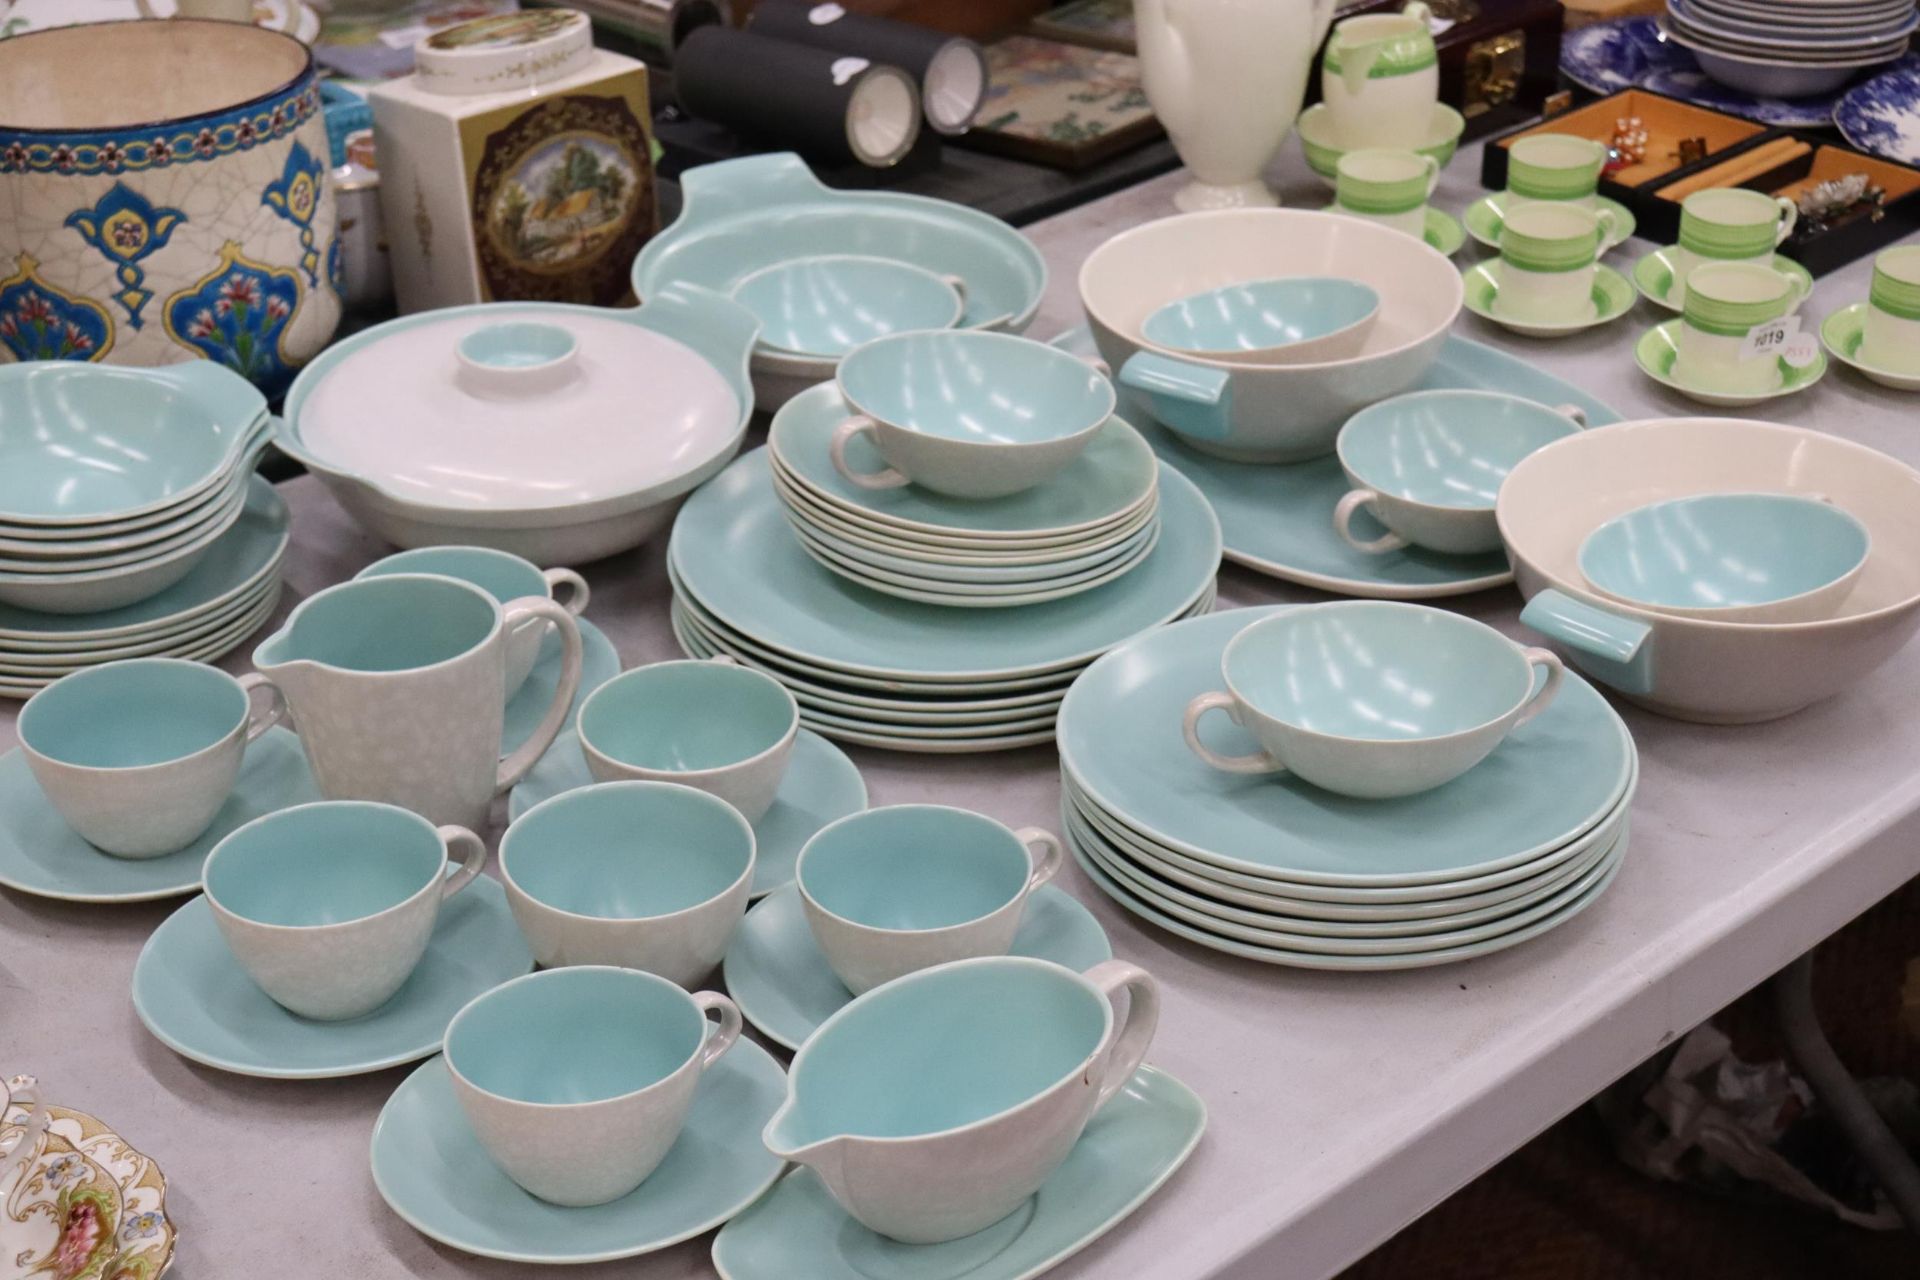 A POOLE POTTERY DINNER SERVICE TO INCLUDE SERVING DISHES, BOWLS, VARIOUS SIZES OF PLATES - Image 3 of 15